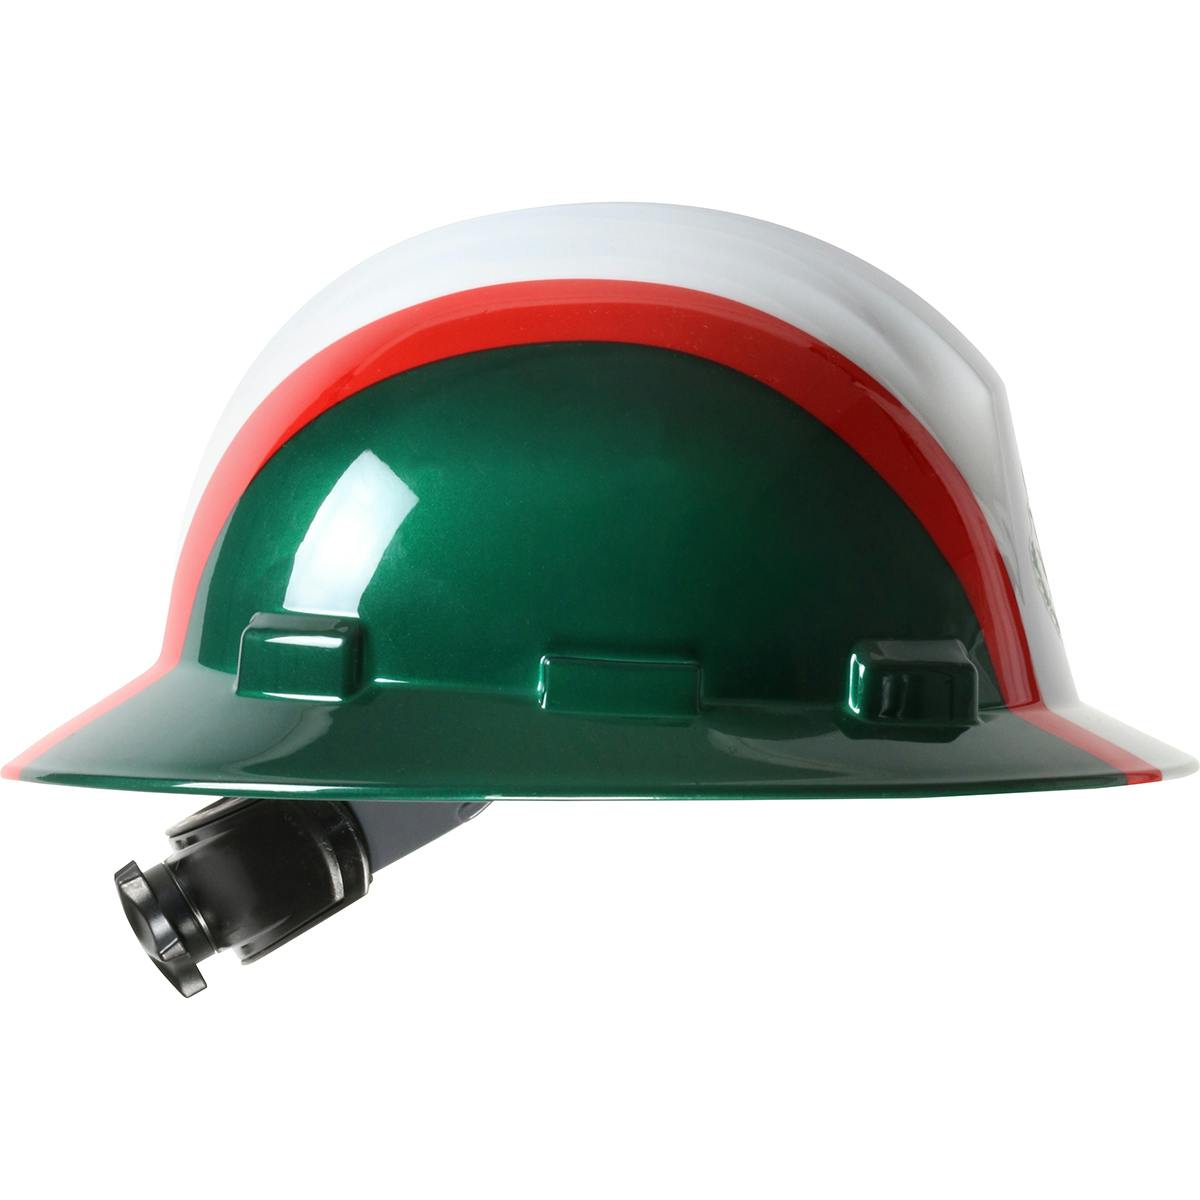 Full Brim Hard Hat with HDPE Shell, 4-Point Textile Suspension Graphic Wrap and Wheel Ratchet Adjustment, White (280-HP641R-MEX) - OS_3